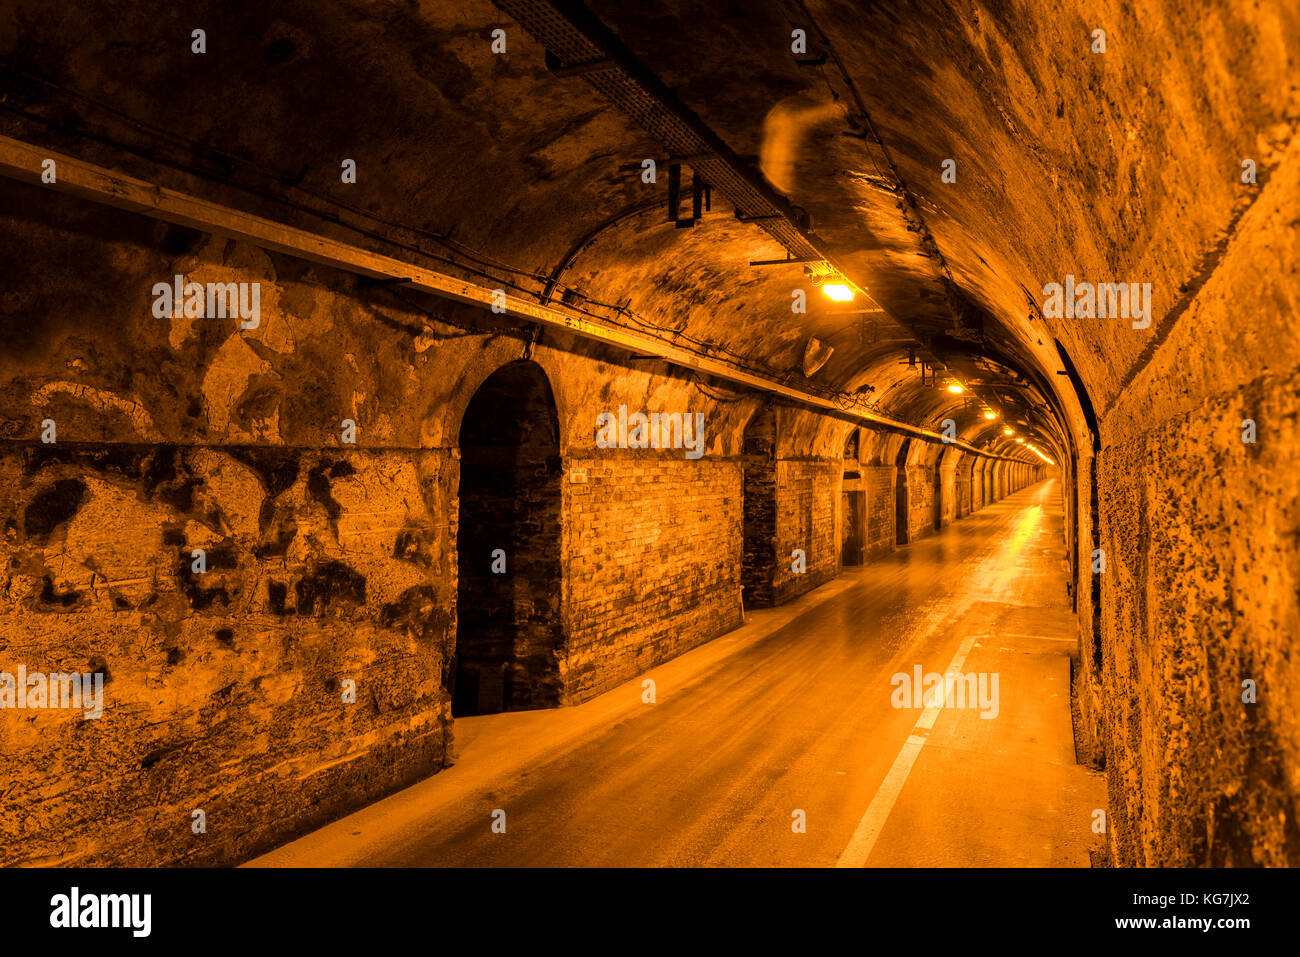 Reims, France - June 14, 2017: the caves with very long corridor of Champagne House Mumm, France. Stock Photo